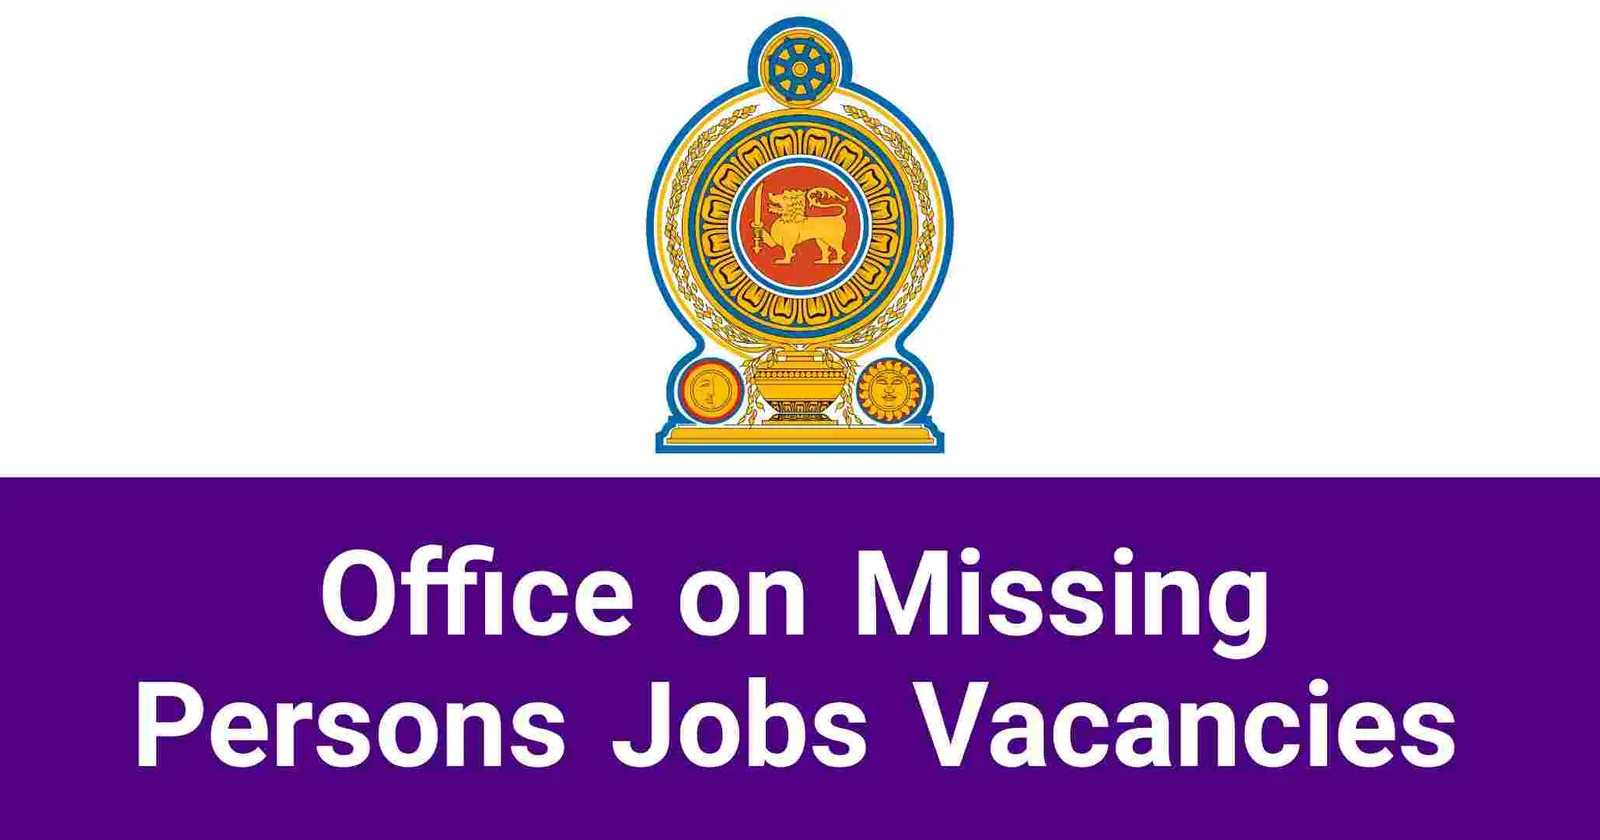 Office on Missing Persons Jobs Vacancies